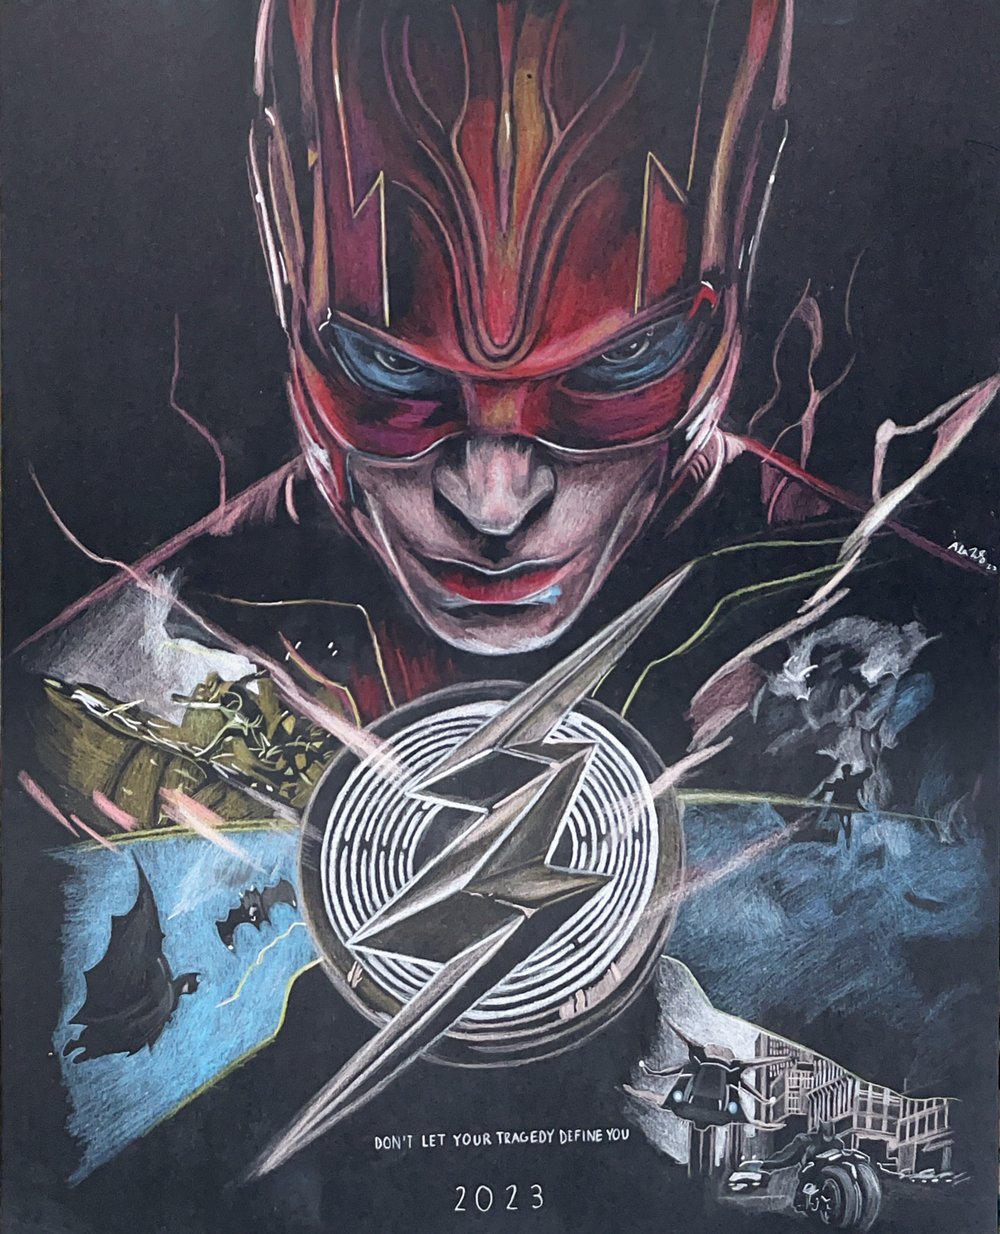 Image of “Don’t let your tragedy define you.” THE FLASH Art Print